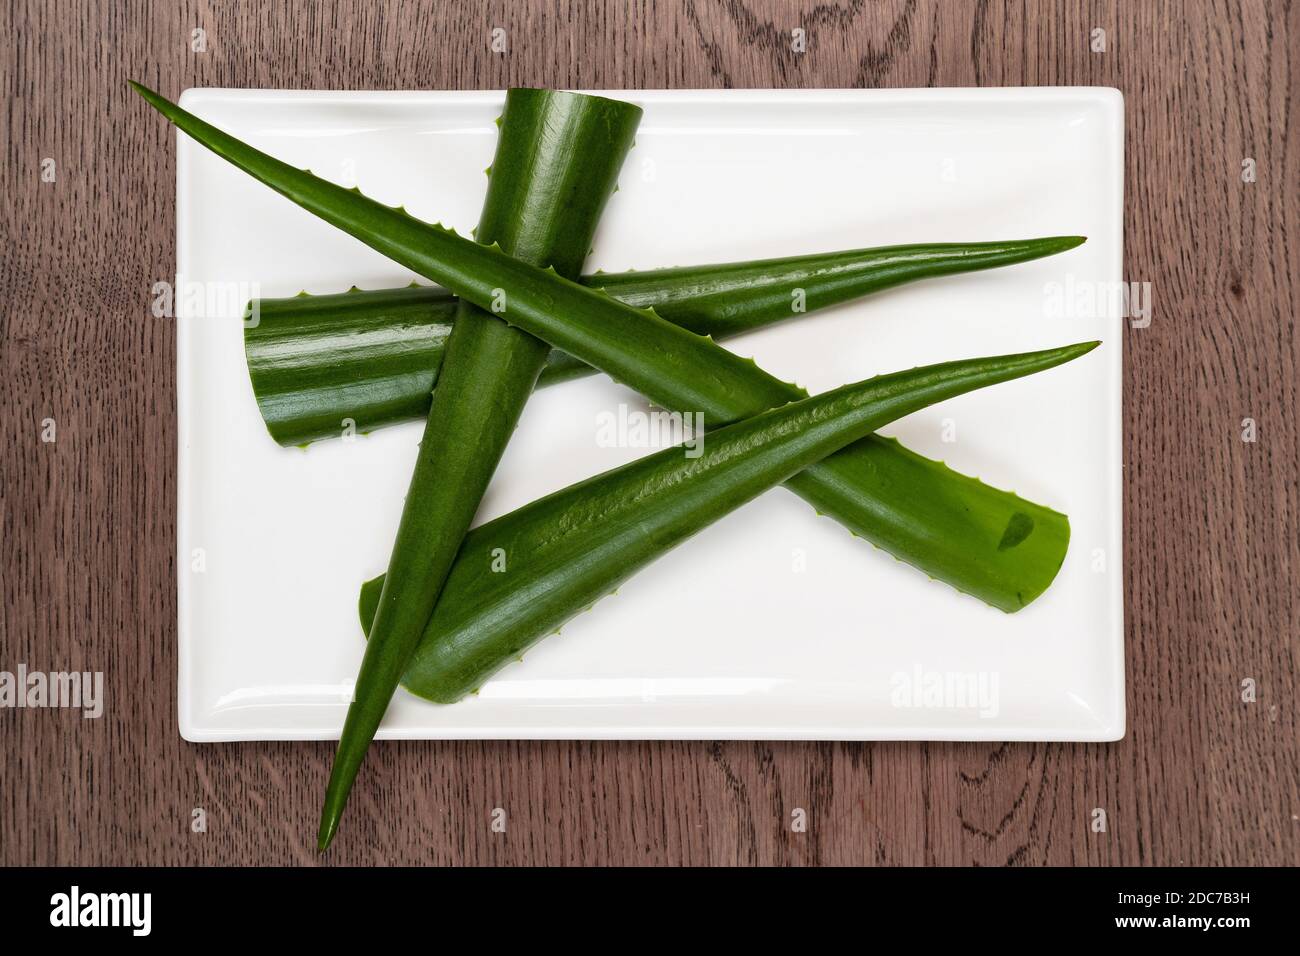 Four green clean elongated leaves of an aloe vera plant lie scattered on a white ceramic plate. Stock Photo